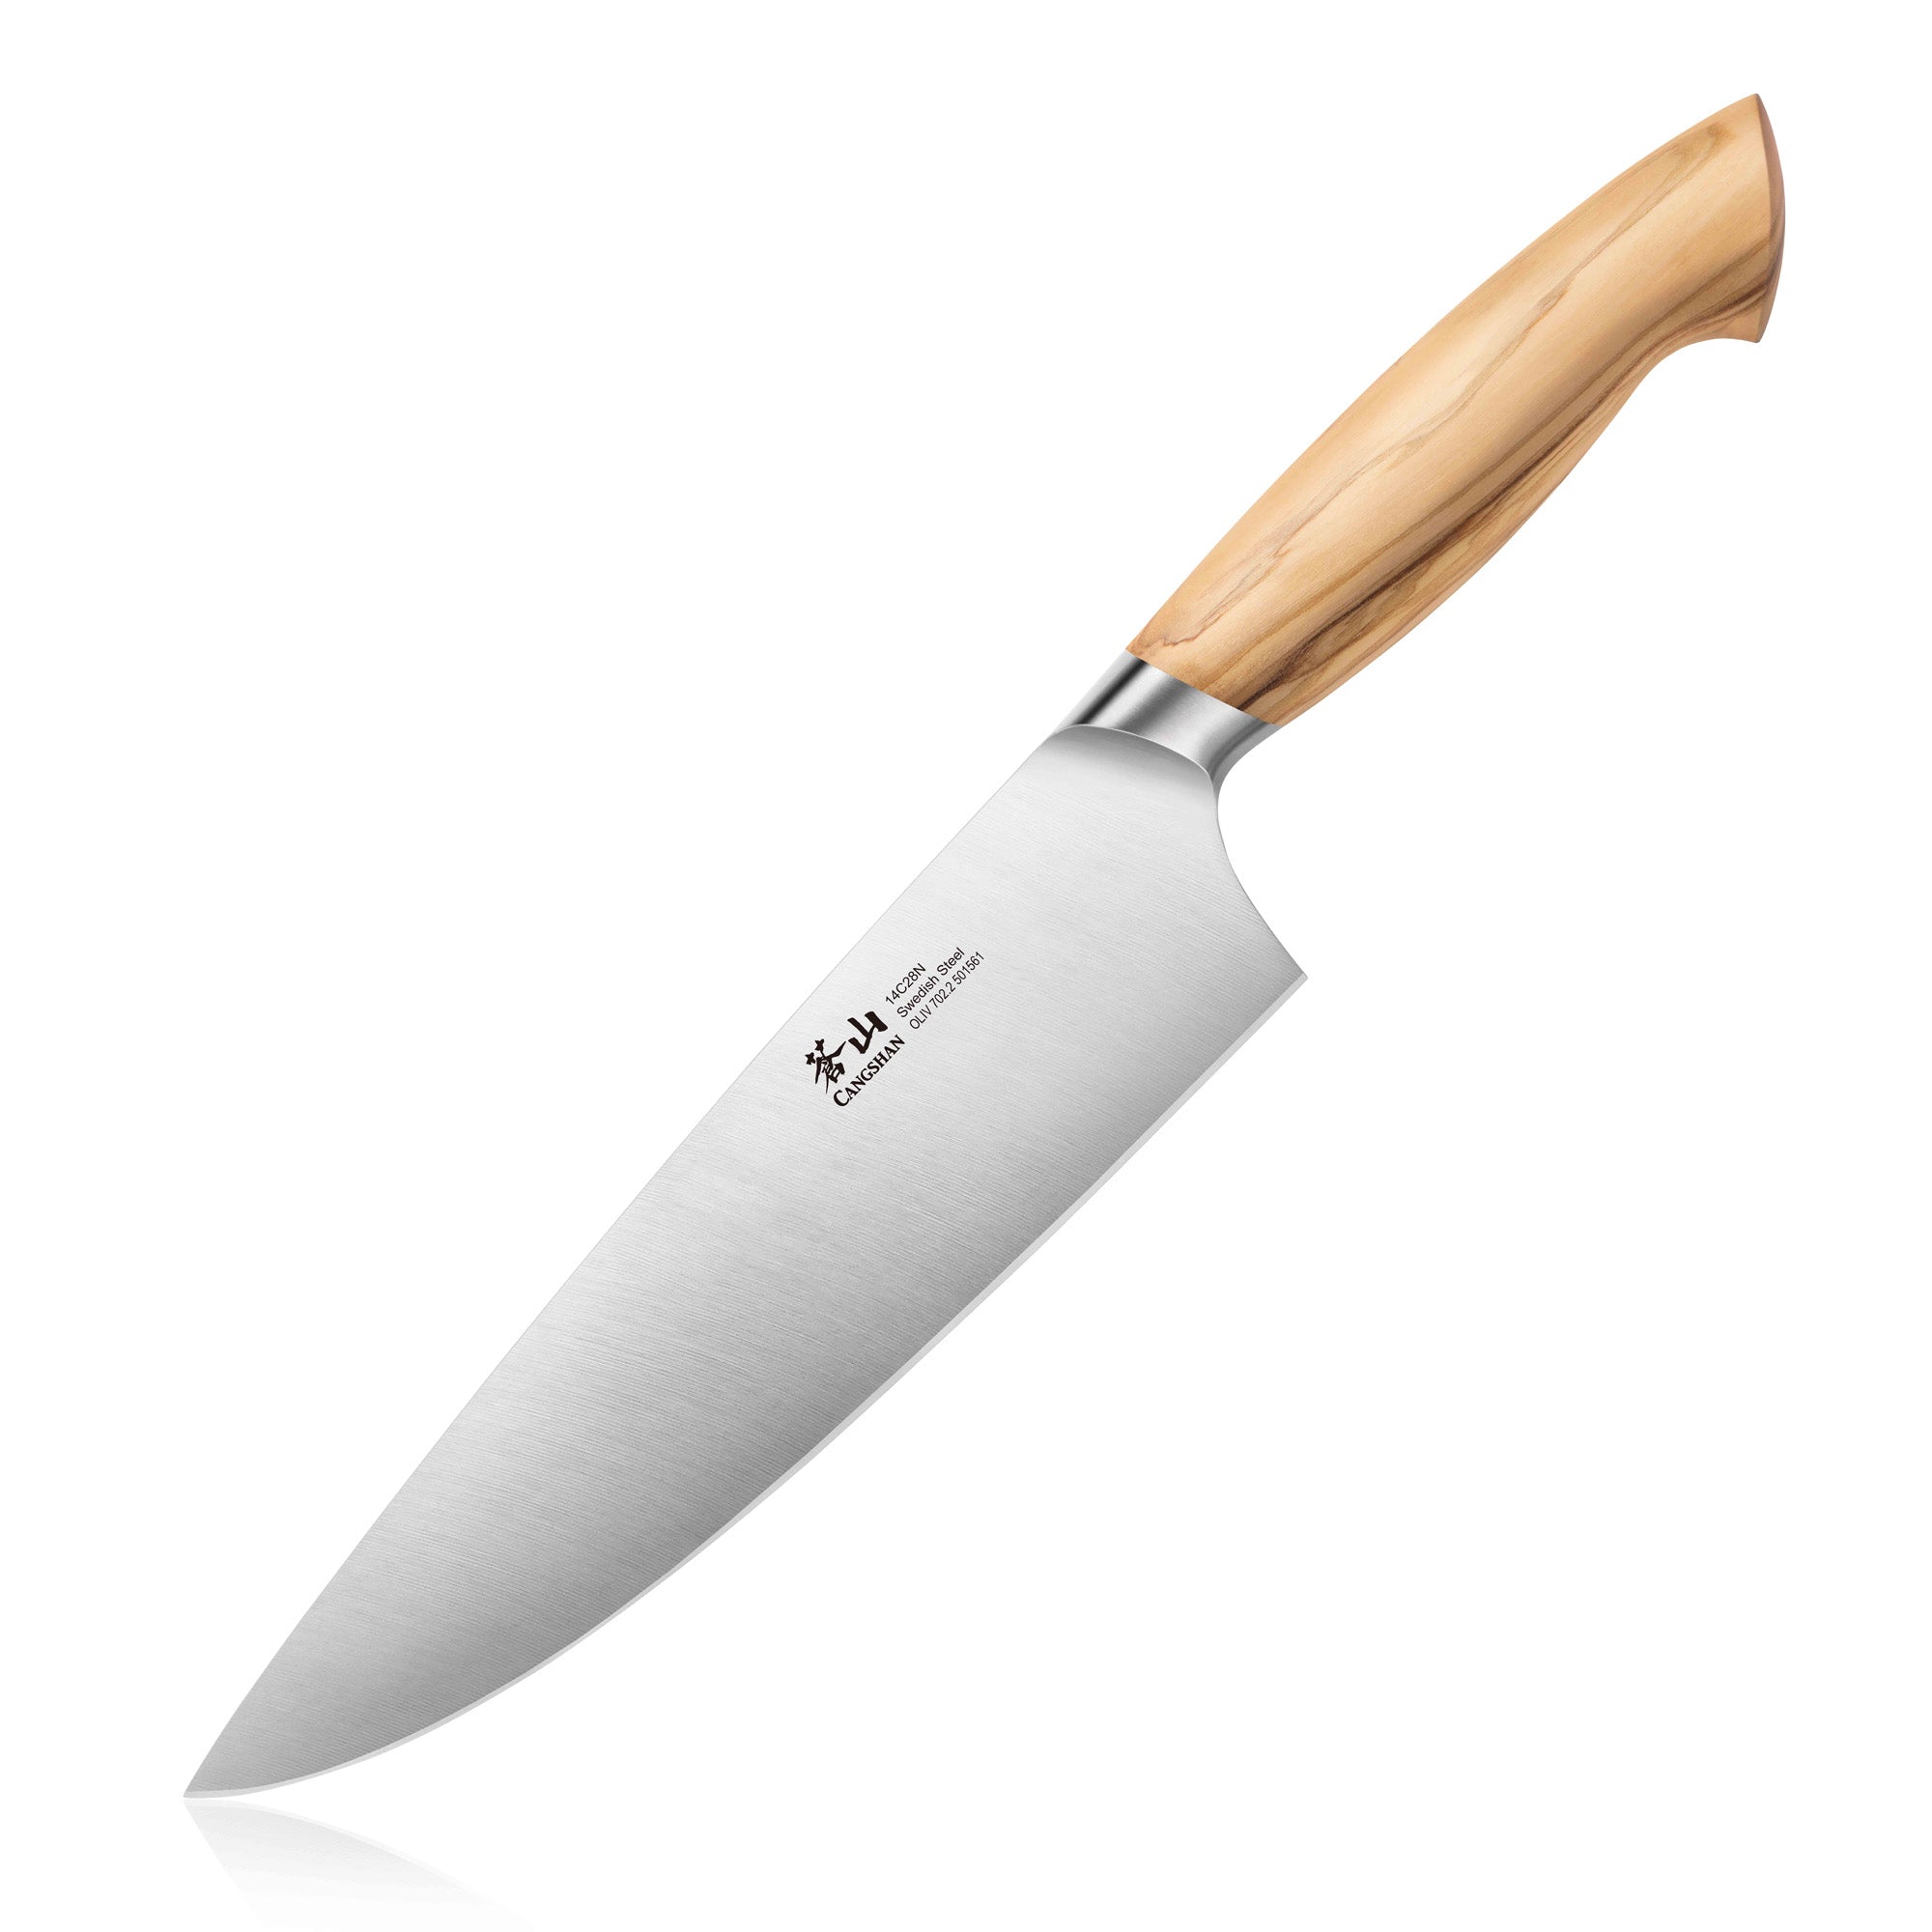 Chef's Knife - Classic French Style with g10 handle — Feder knives